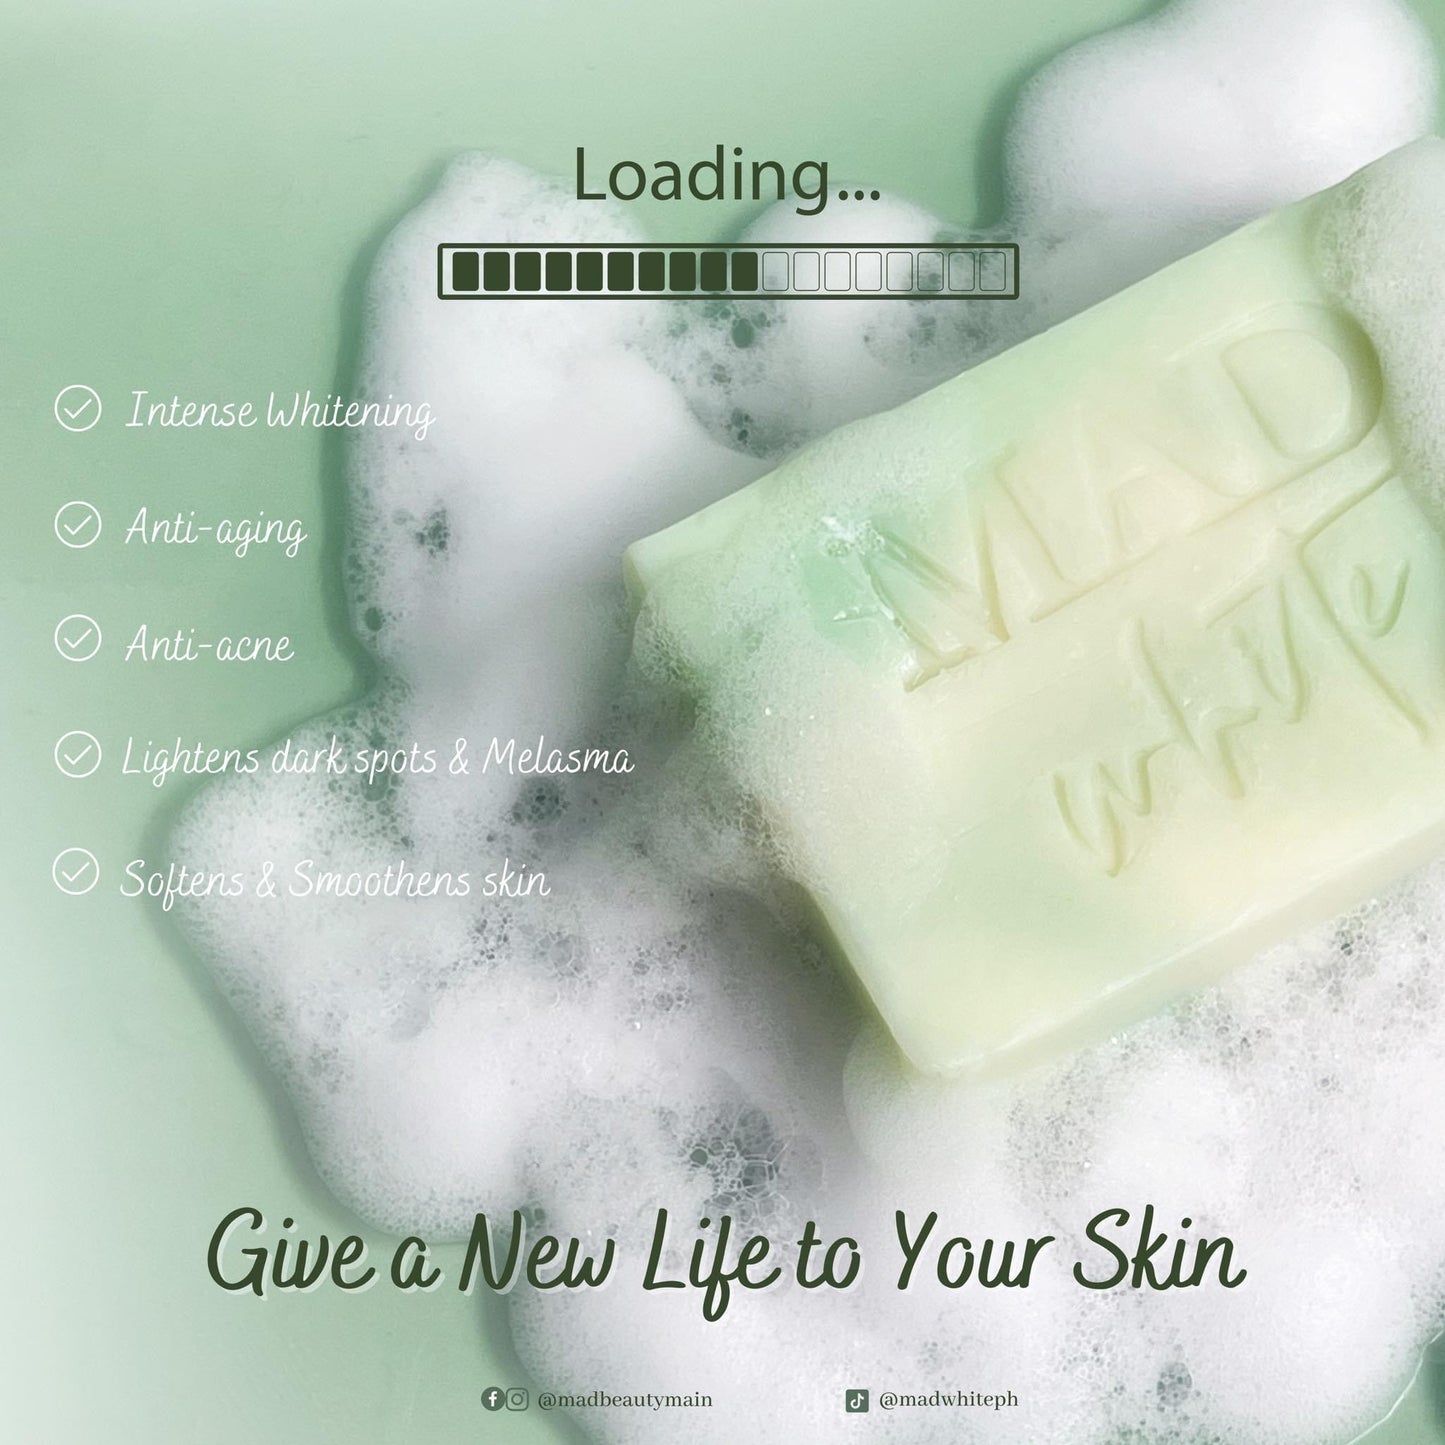 Mad White Intense Whitening Soap (PREORDER) - Astrid & Rose